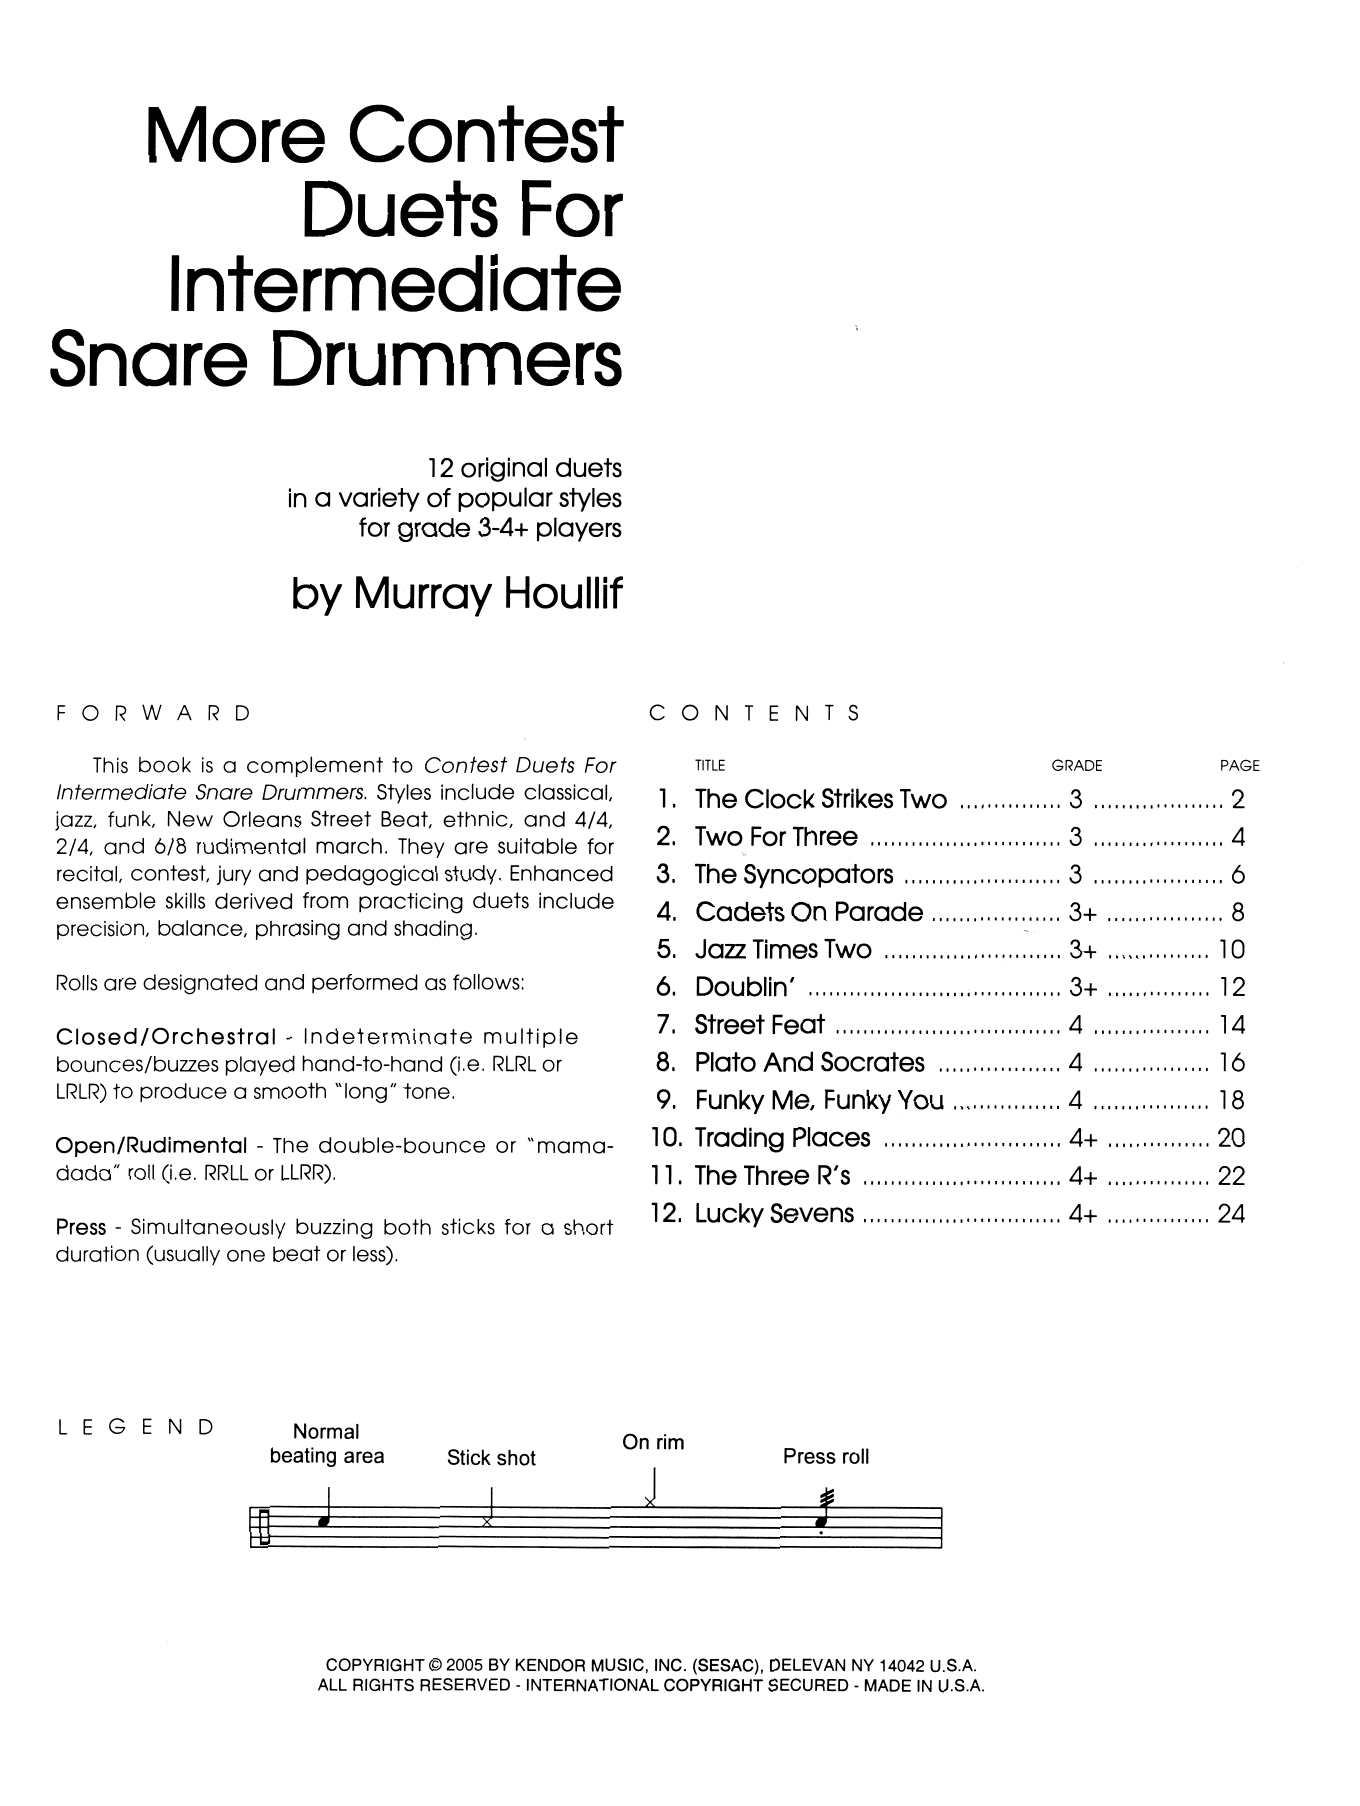 More Contest Duets For Intermediate Snare Drummers (Percussion Ensemble) von Murray Houllif